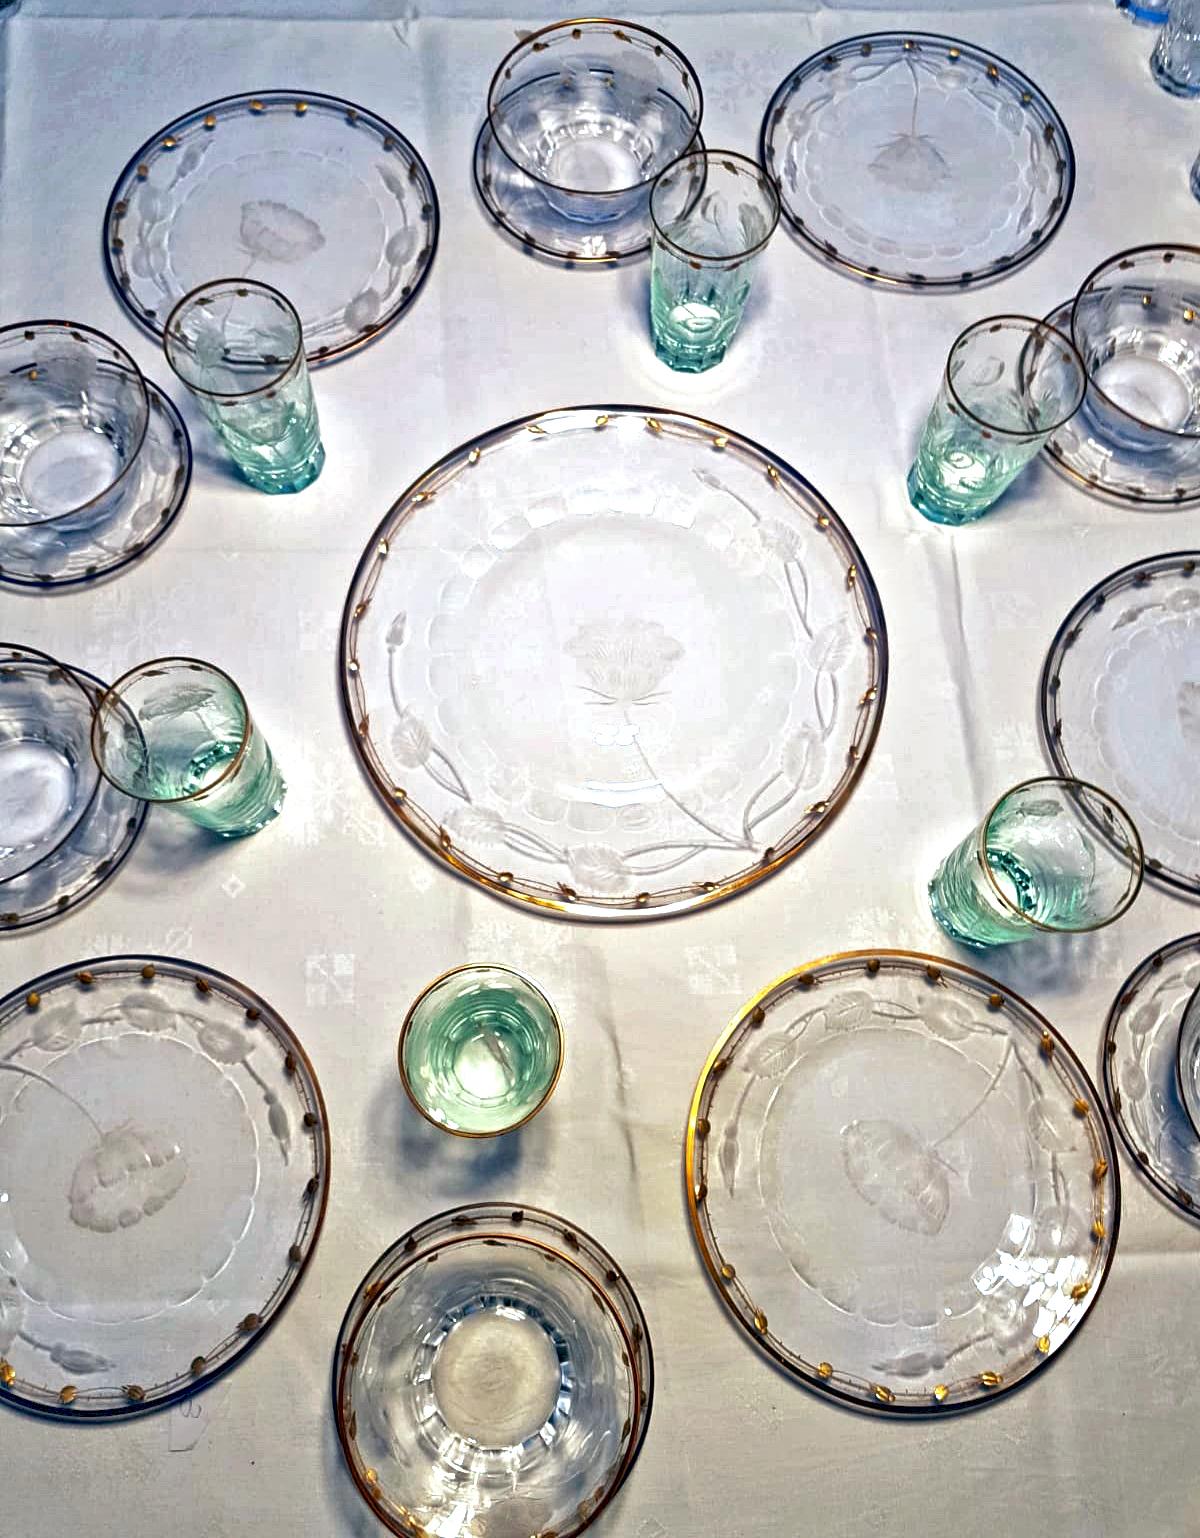 These are 5 small plates of hand blown crystal made by Moser in the ever popular Art Nouveau 